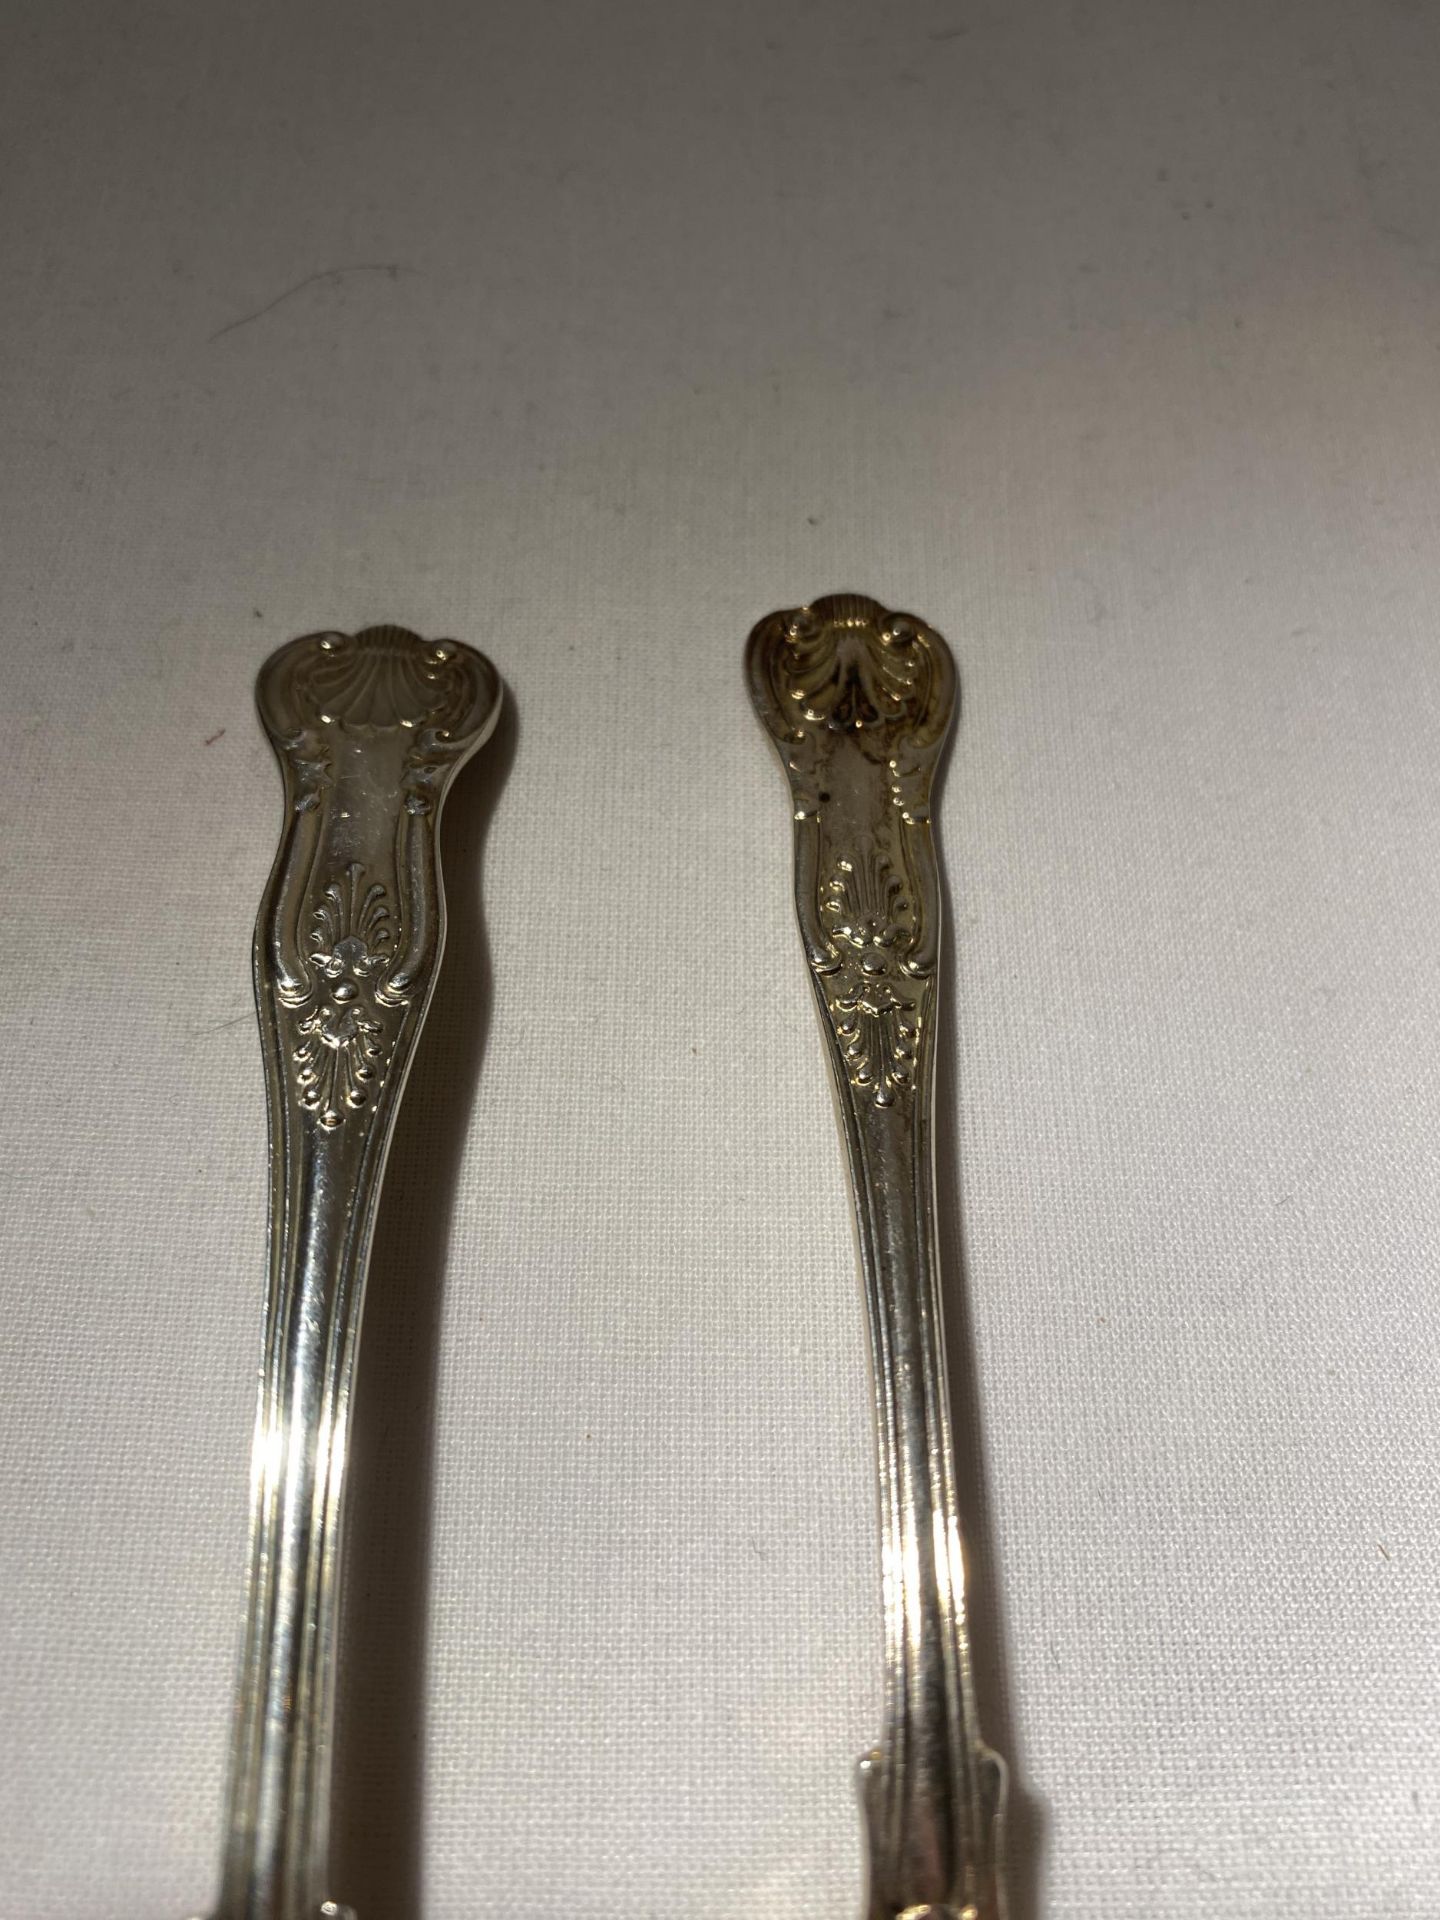 TWO SHEFFIELD HALLMARKED SILVER SPOONS, EARLIEST BEING 1925, MAKER WILLIAM HUTTON & SONS LTD, - Image 8 of 18